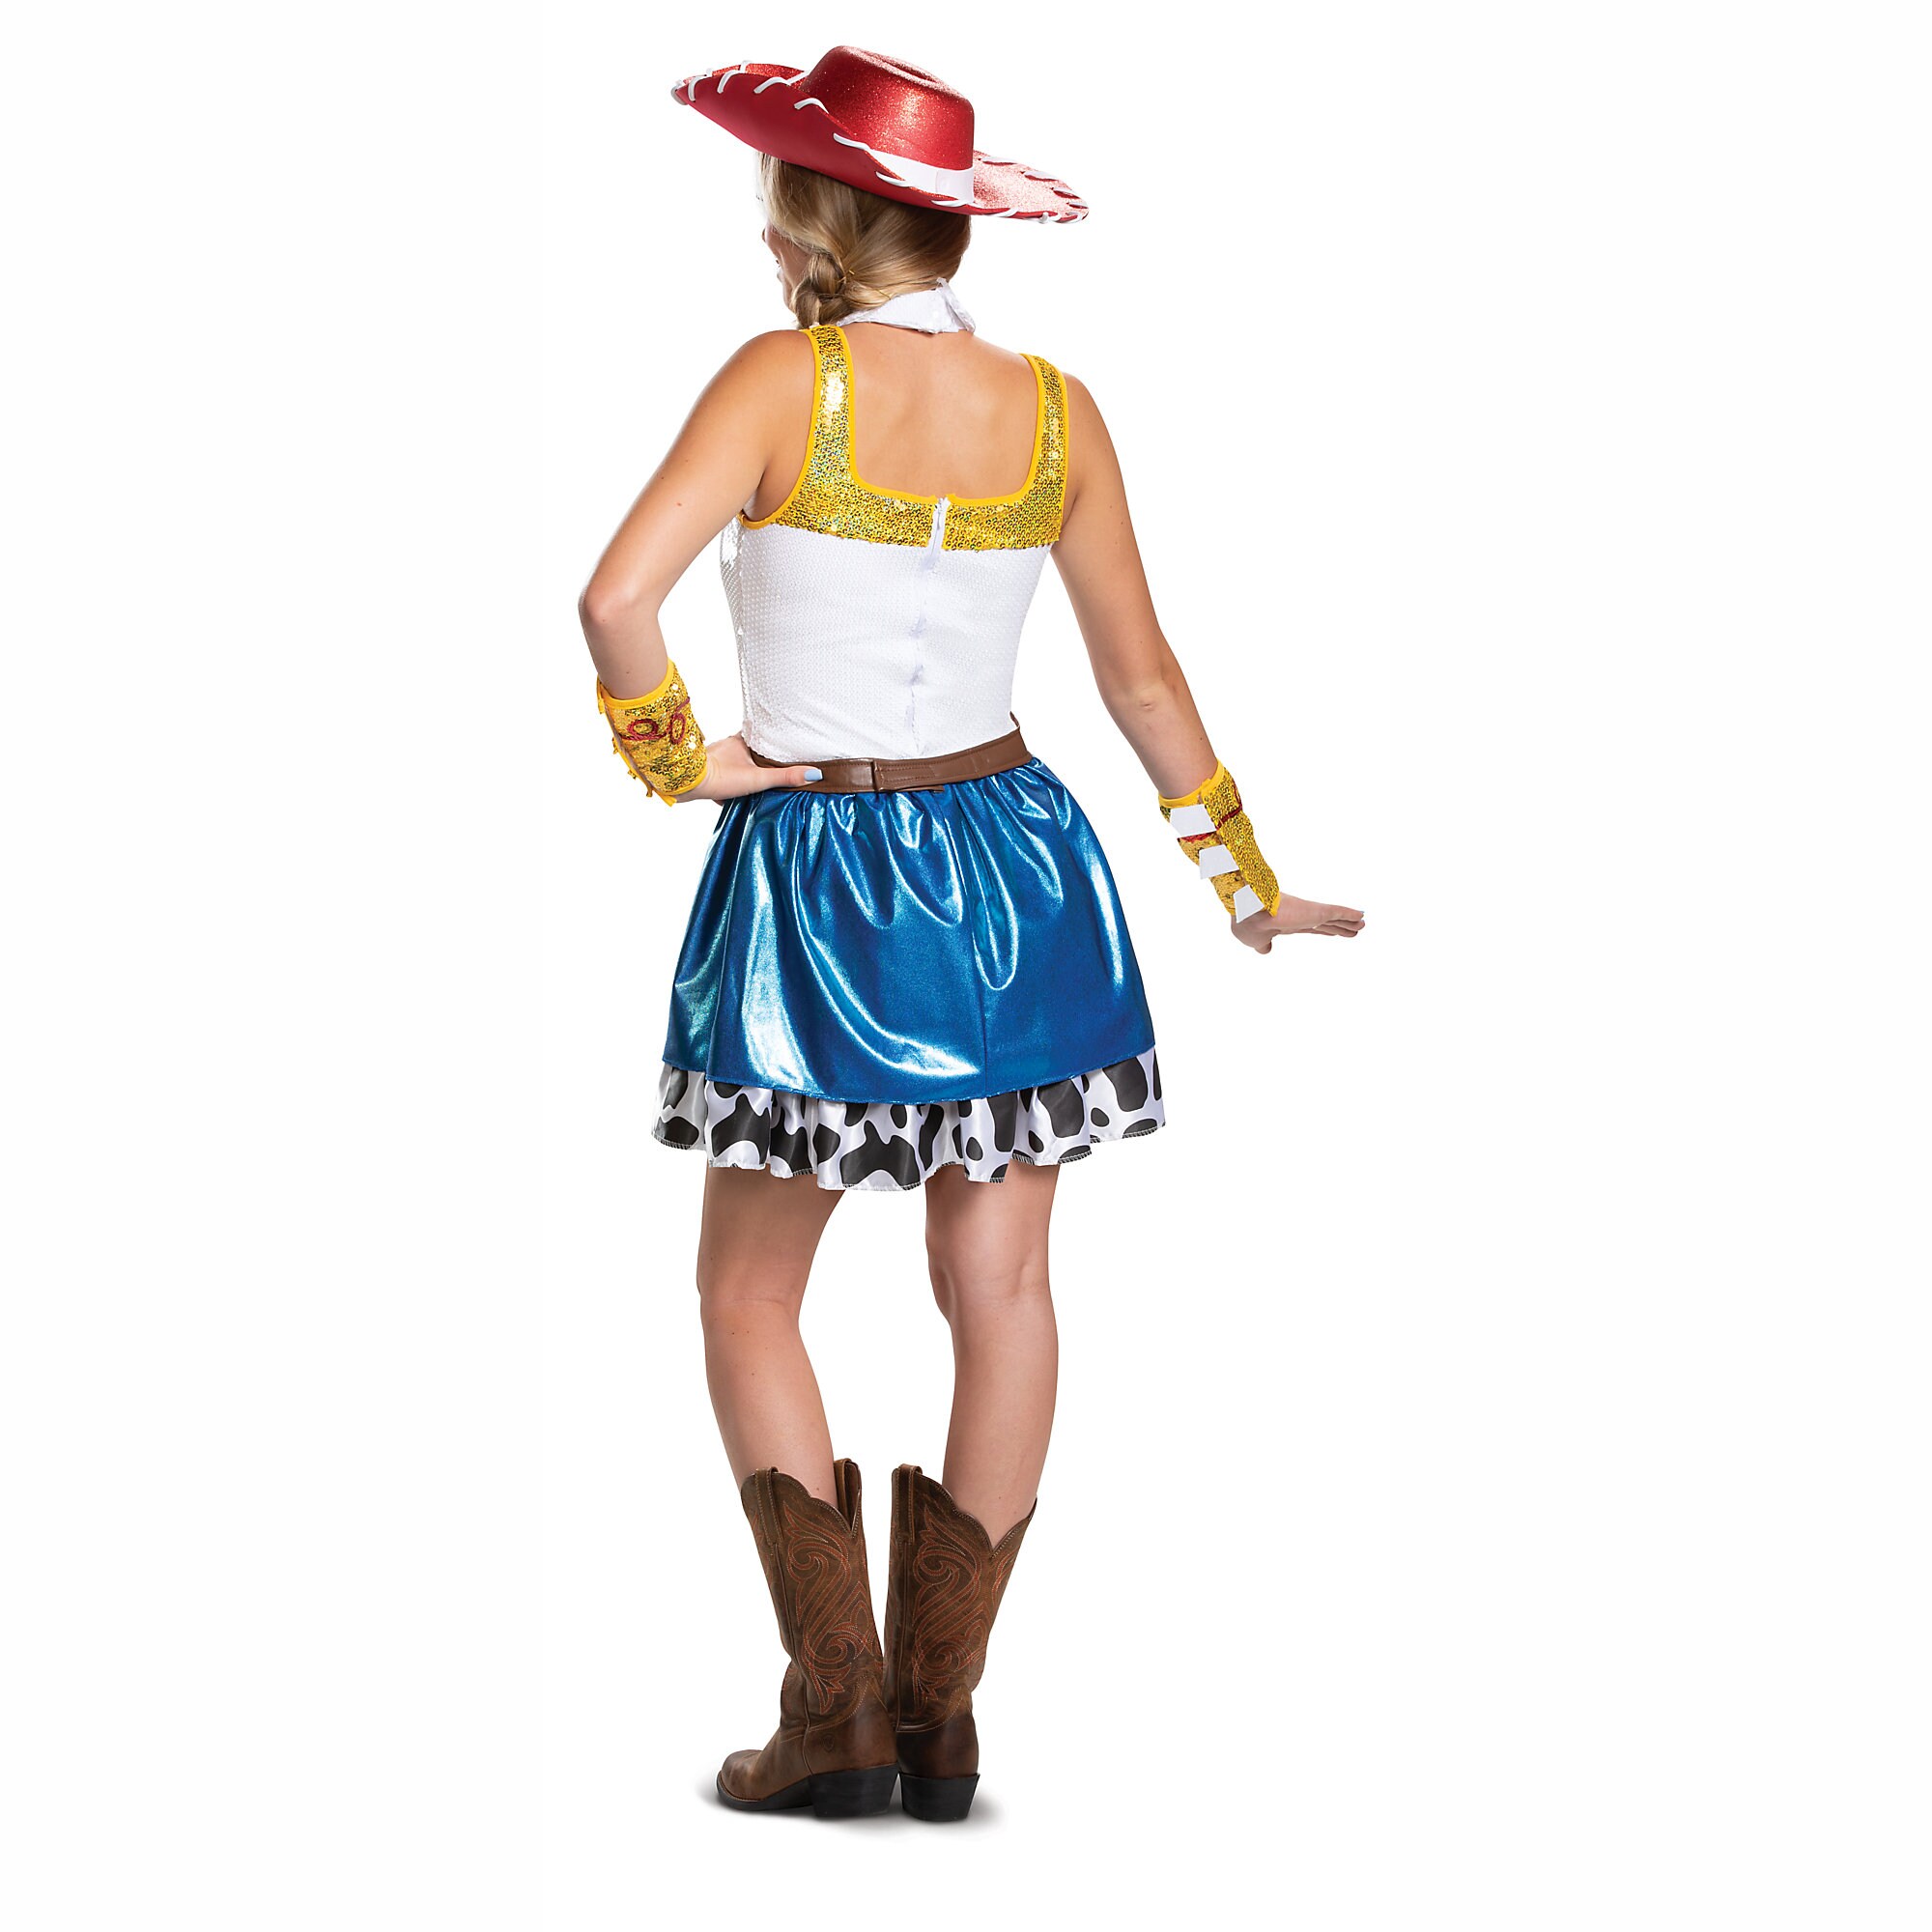 Jessie Dress Costume for Adults by Disguise - Toy Story